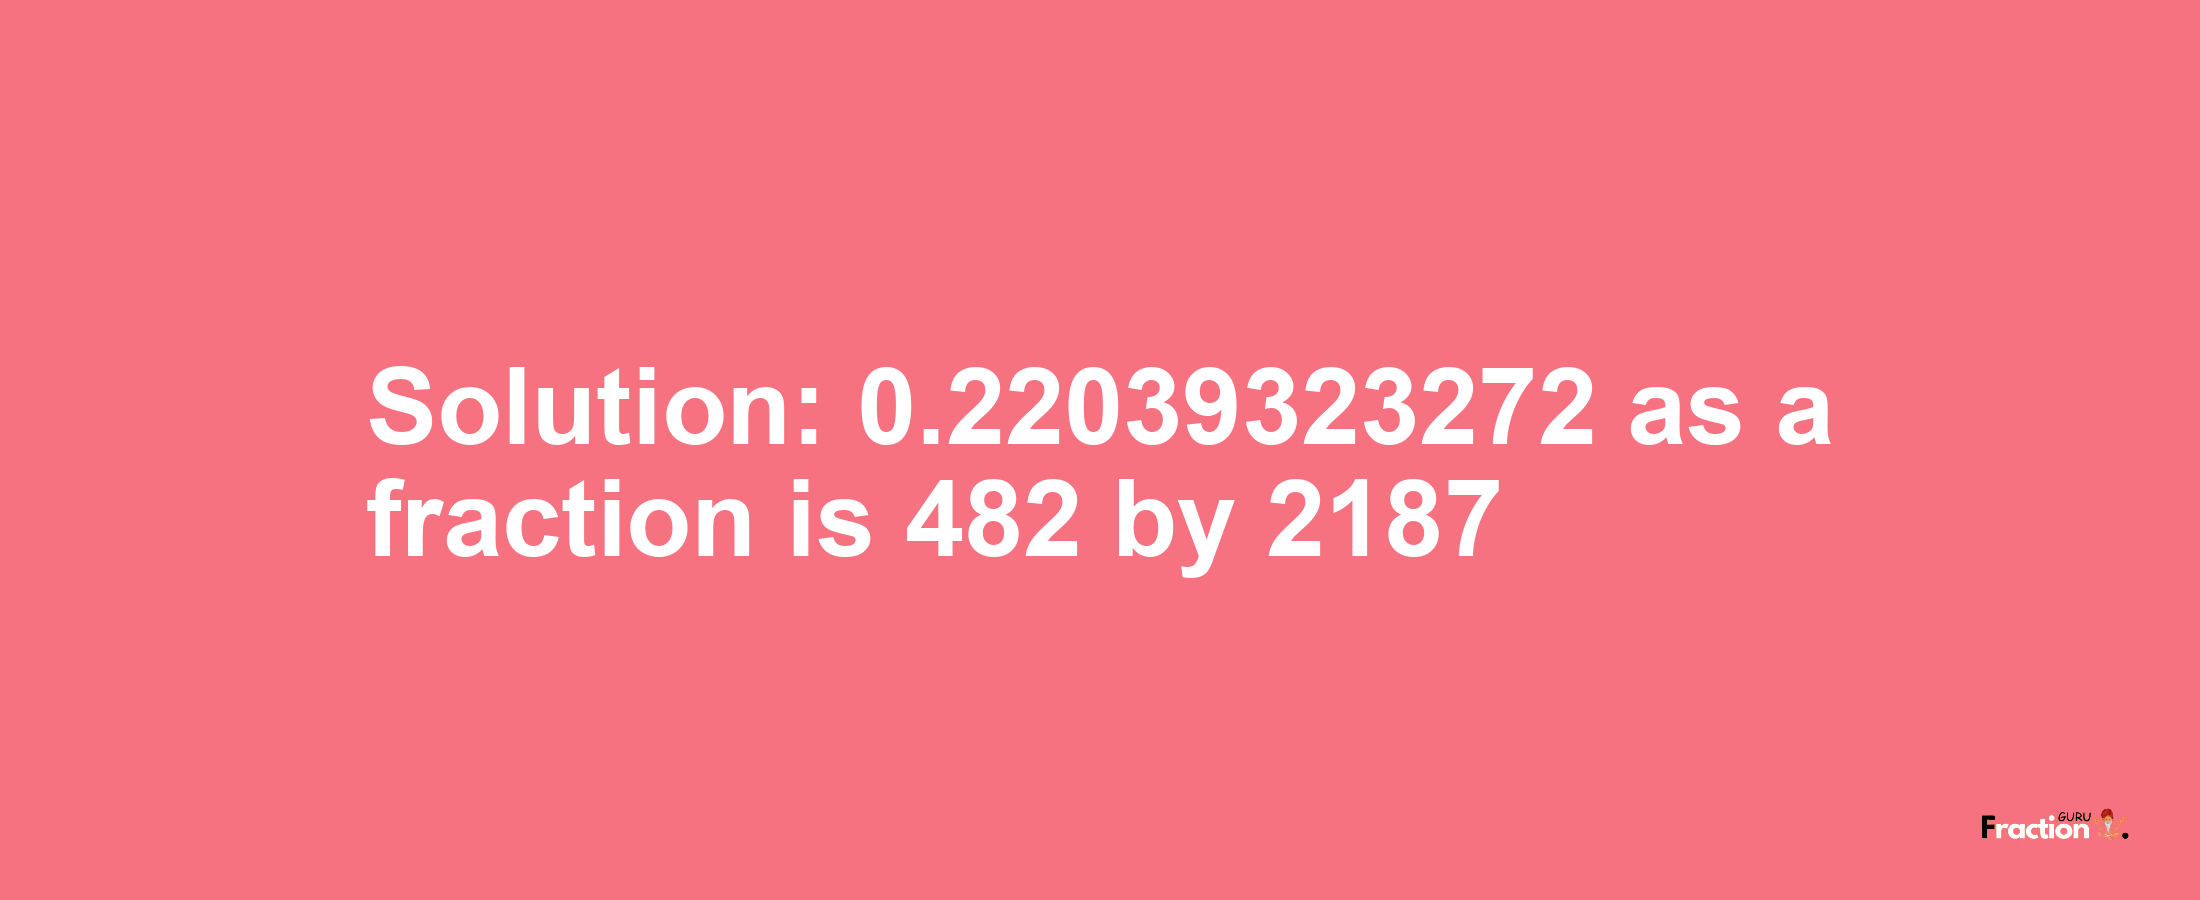 Solution:0.22039323272 as a fraction is 482/2187